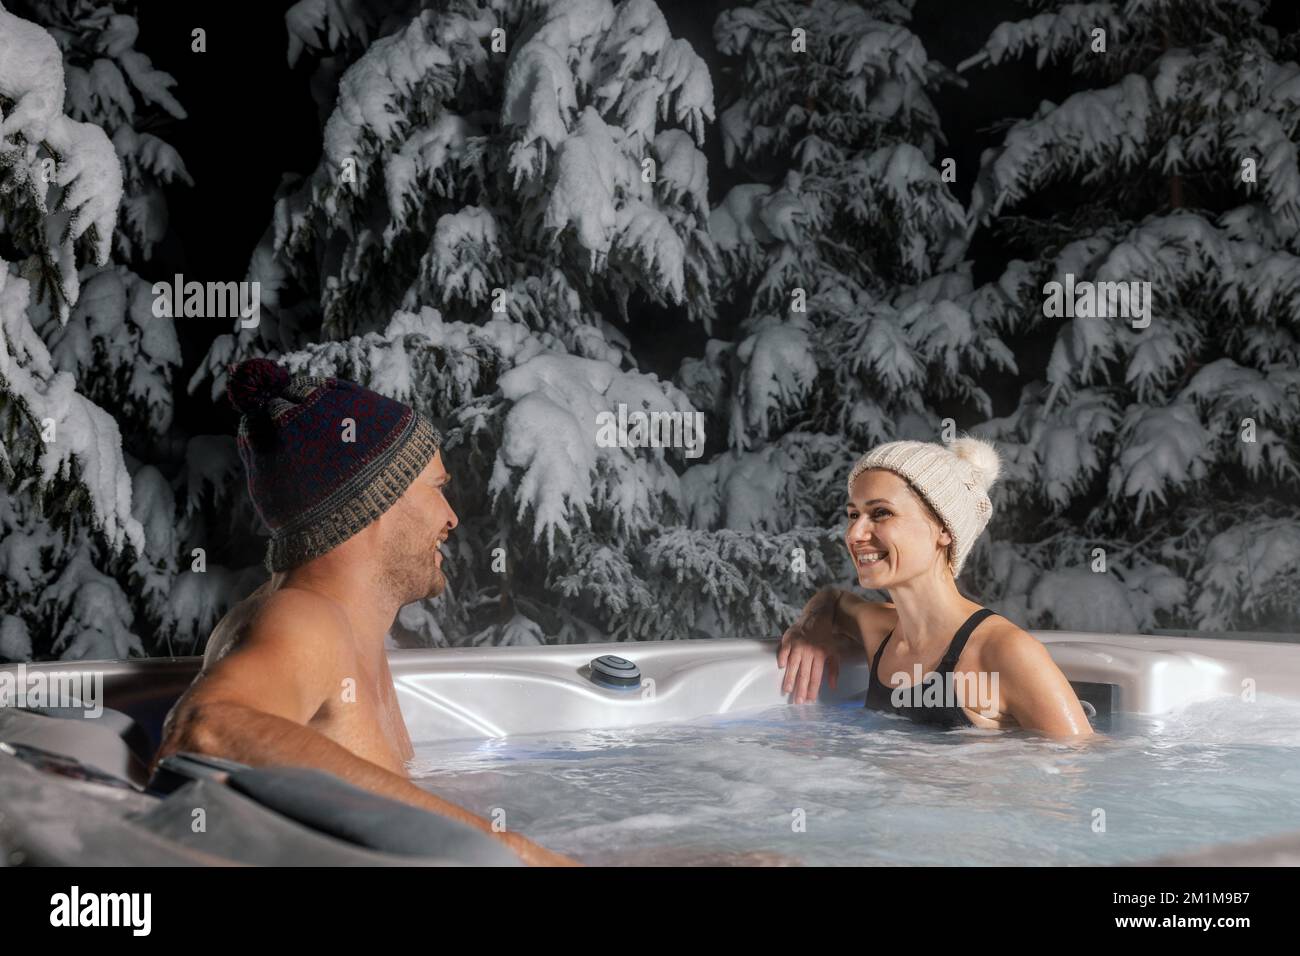 happy couple relaxing in outdoor hot tub at winter with snowy trees in background. spa resort Stock Photo